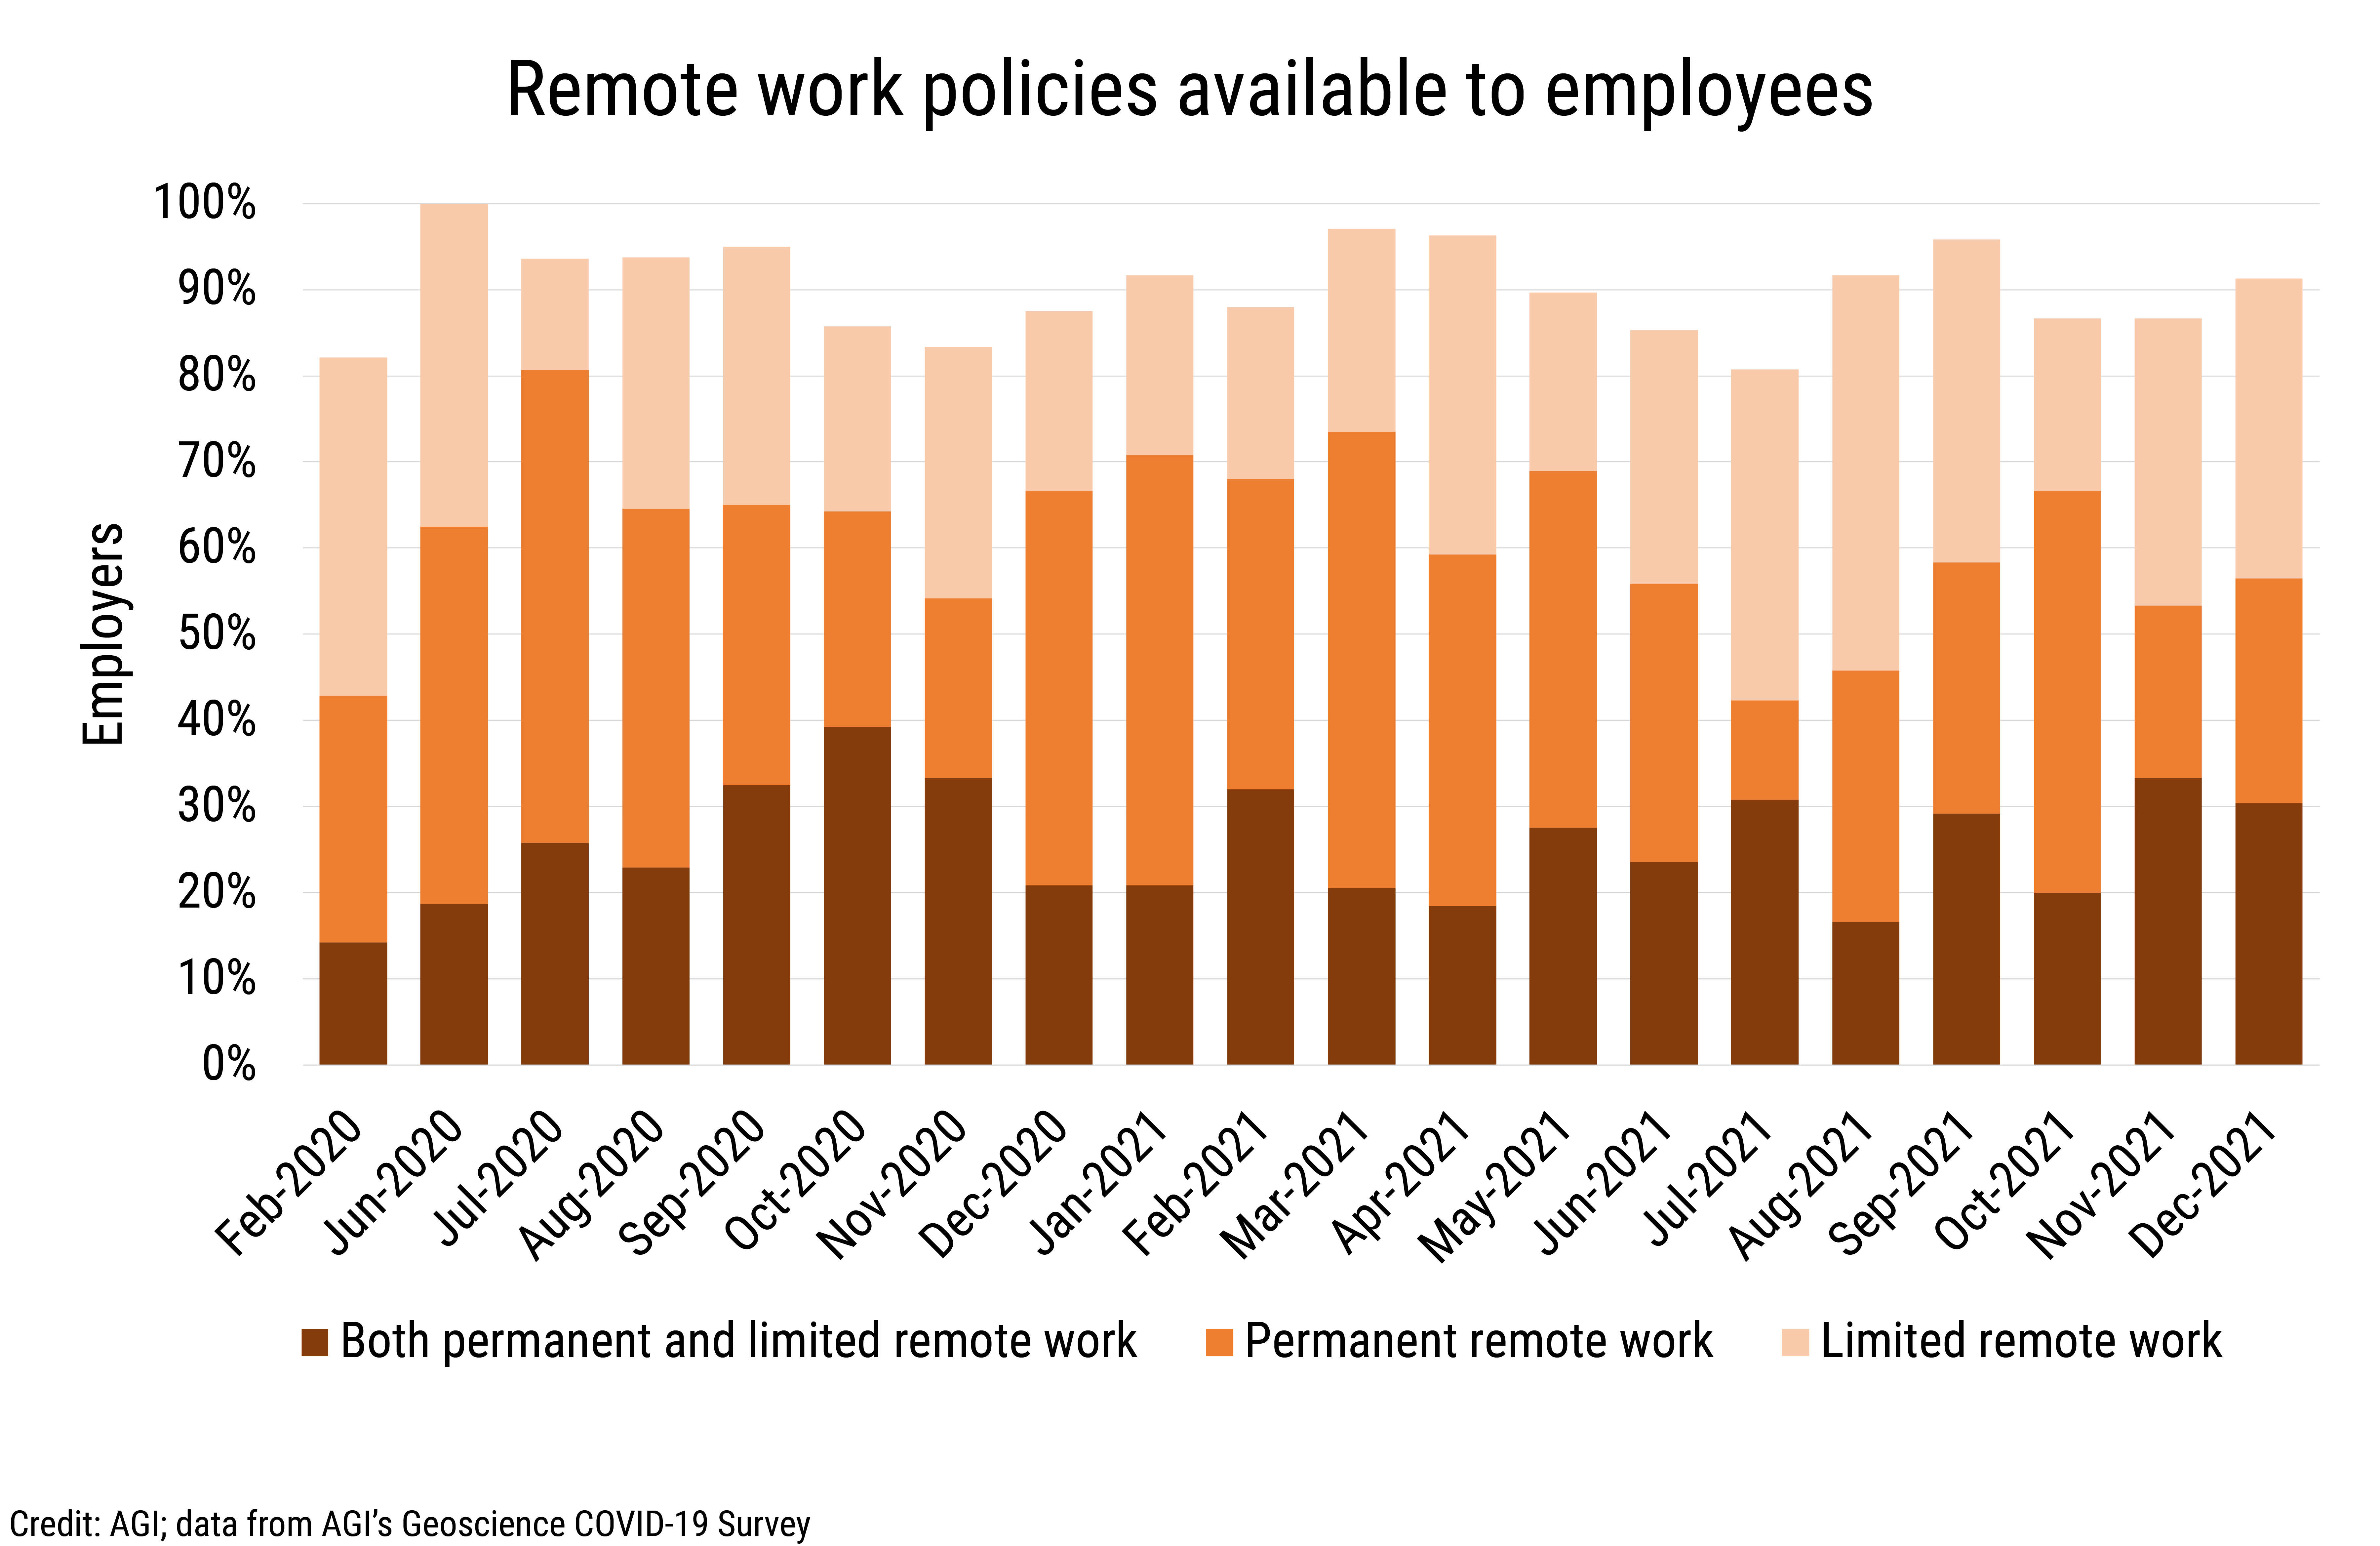 DB_2022-003 chart 07: Remote work policies available to employees(Credit: AGI; data from AGI's Geoscience COVID-19 Survey)